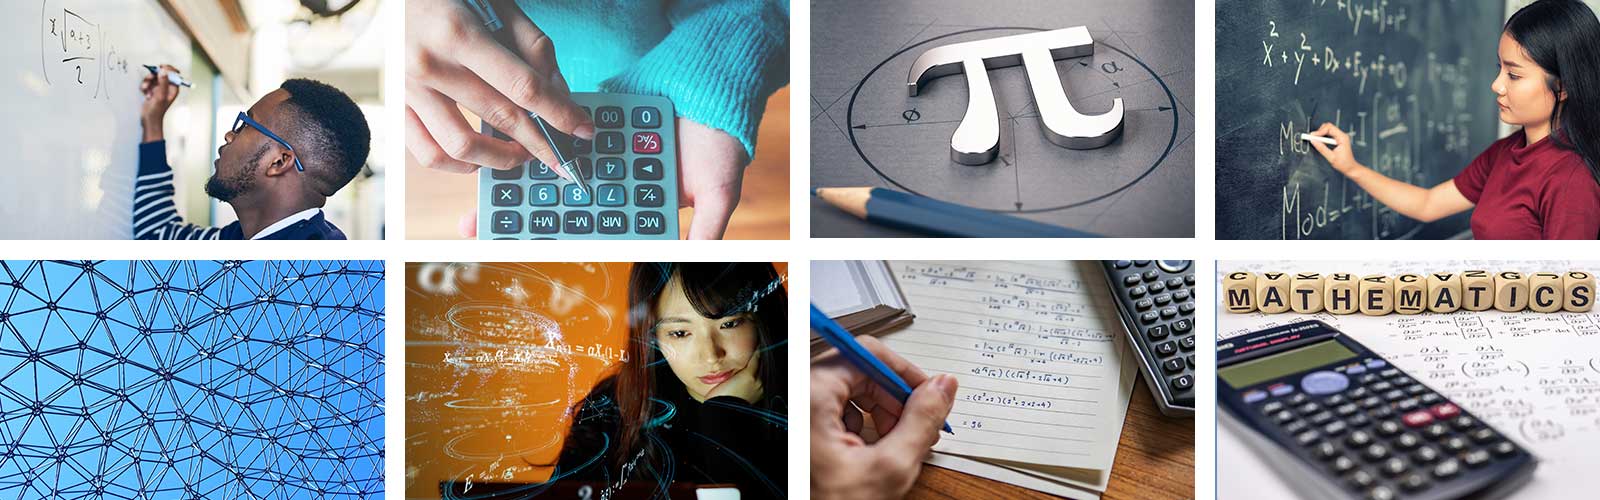 A variety of images showing diverse students studying math, math equipment, paper with math calculations, and geometric shapes in design.